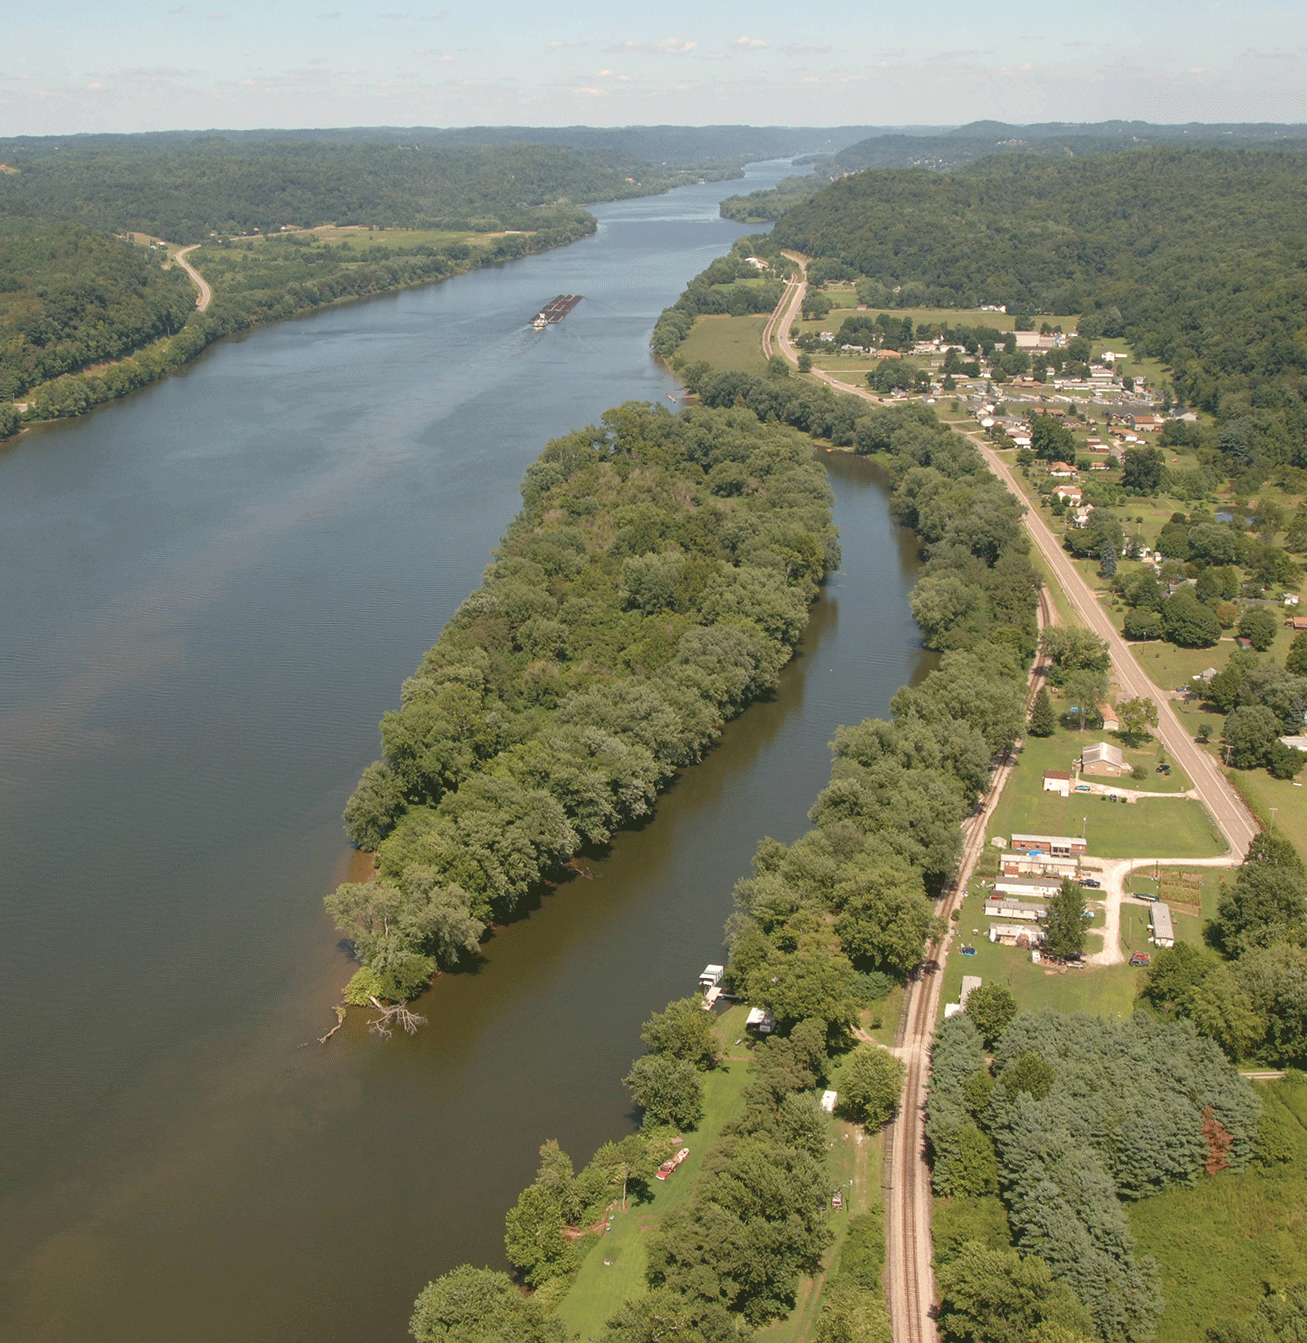 Photograph shows view of river with a small, wooded island near the bank. On the bank,
                     buildings and roads can be seen.